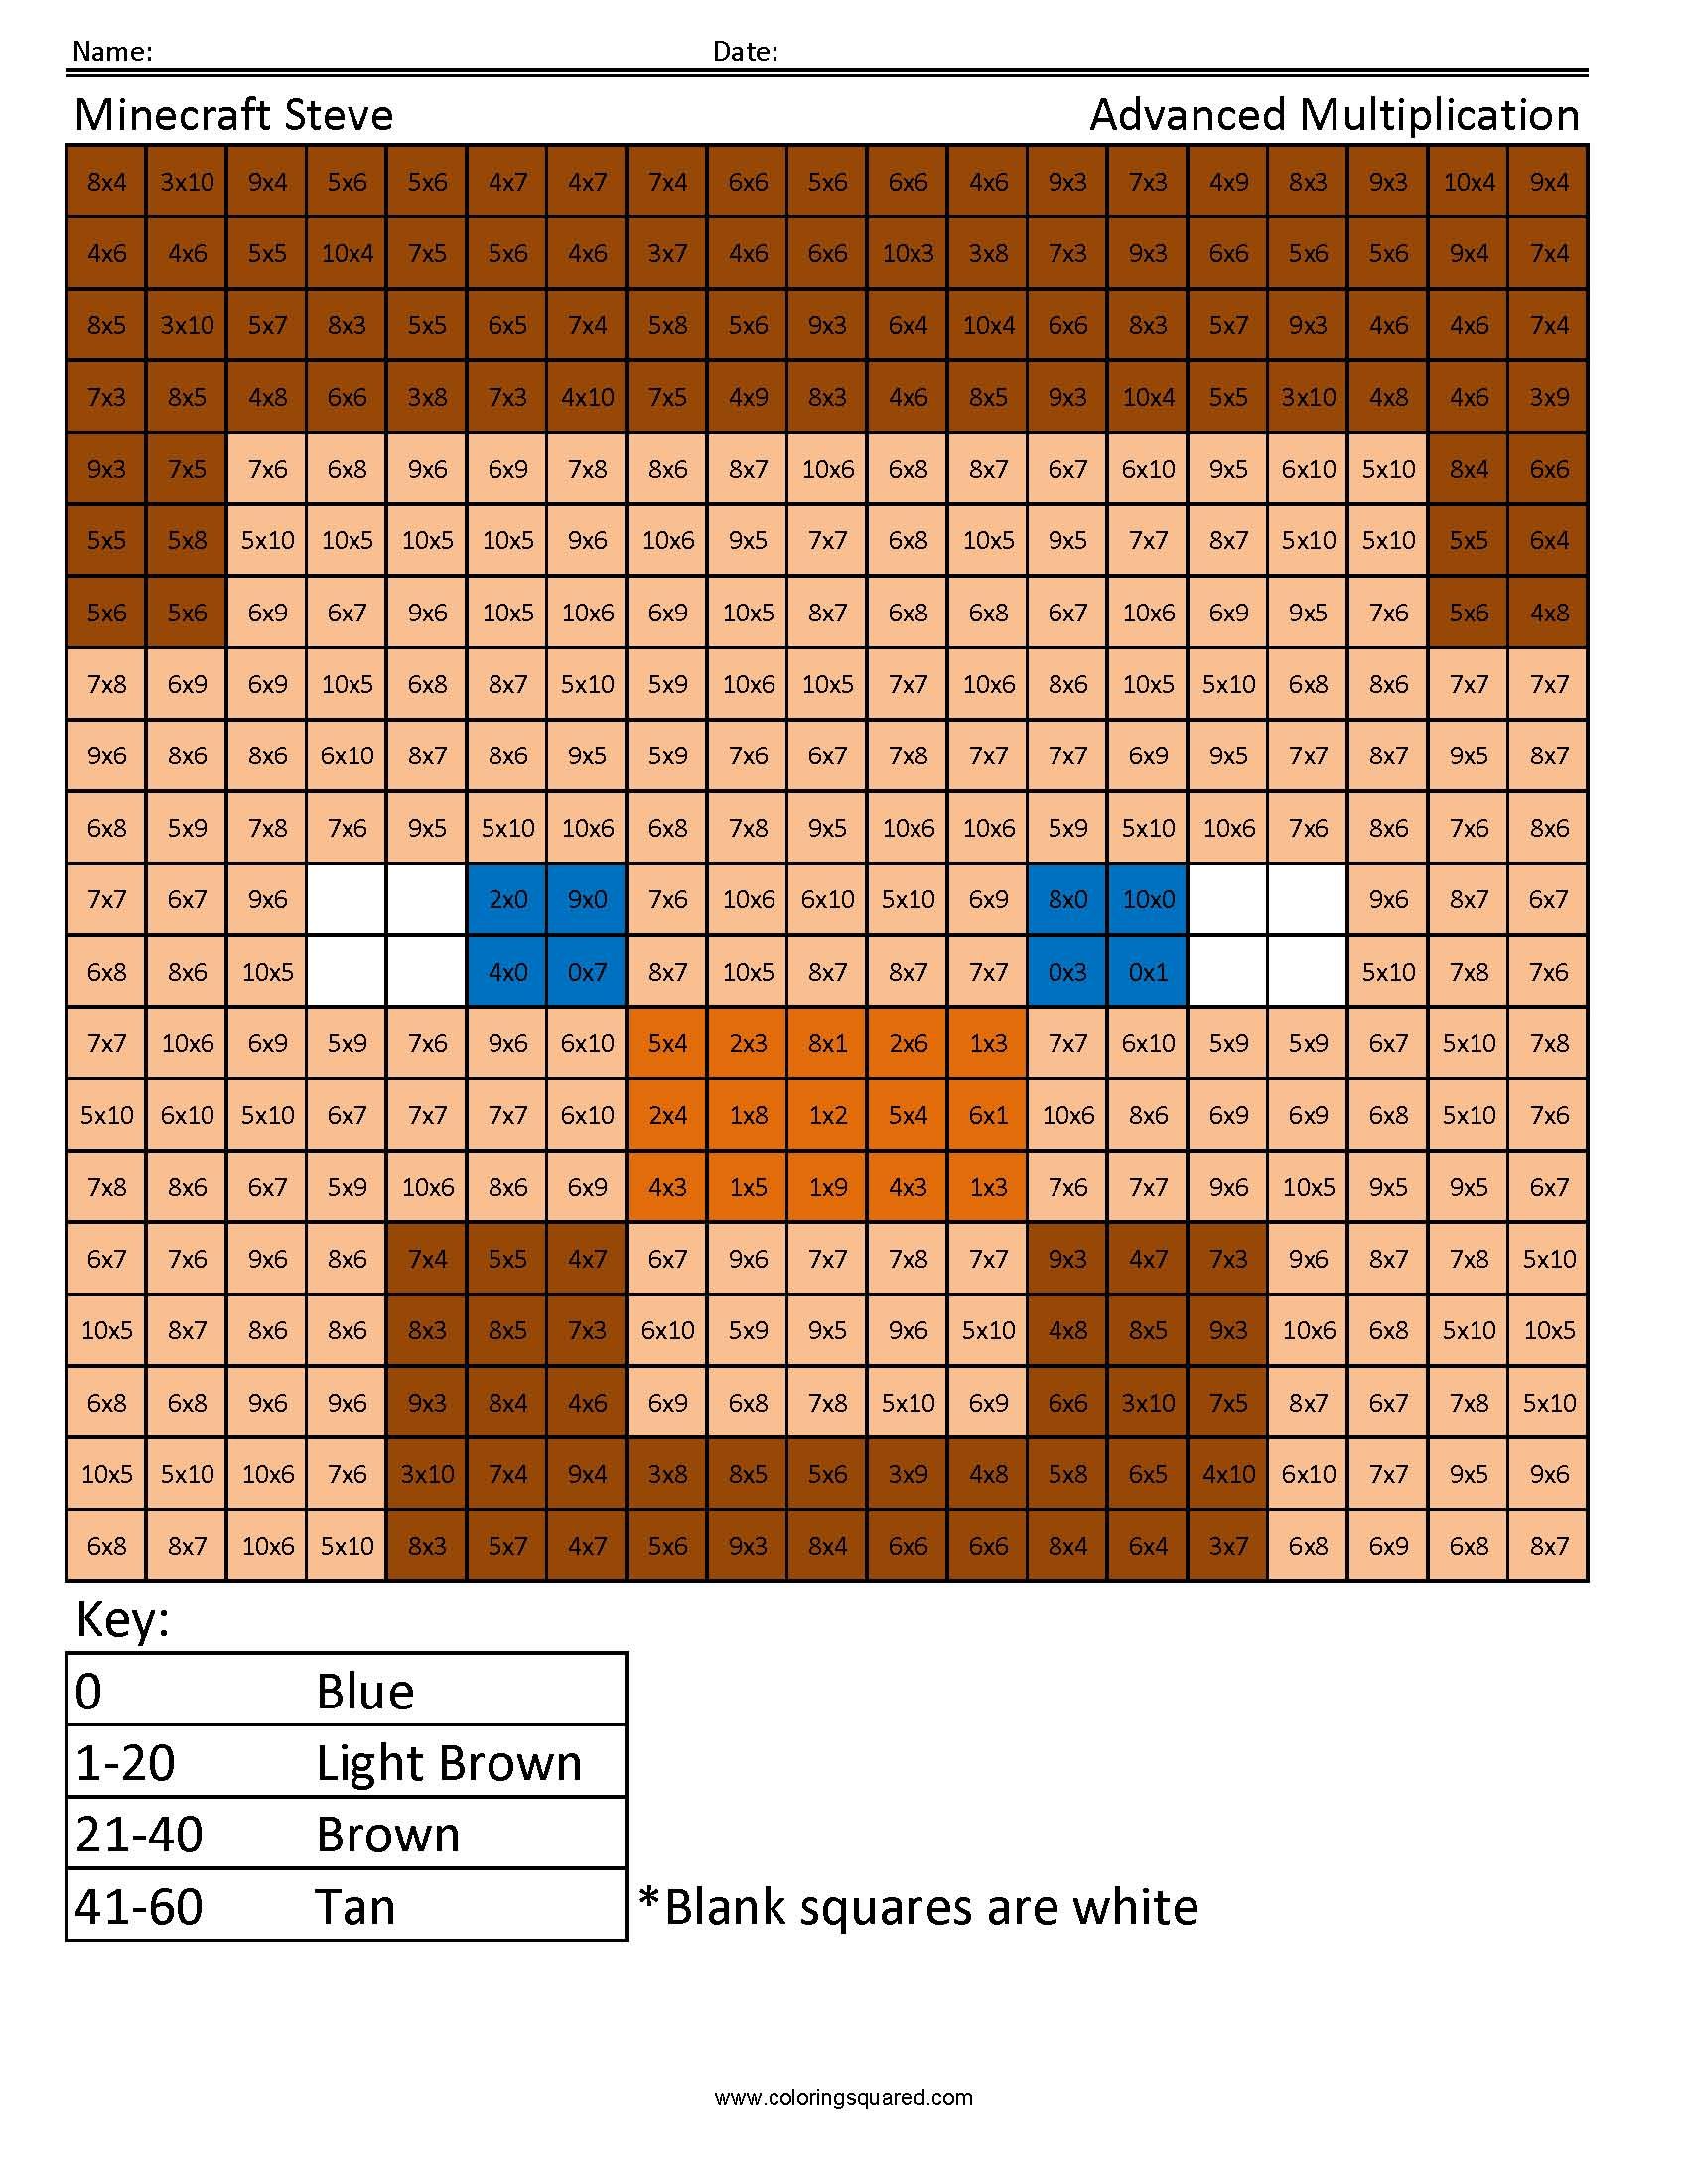 Practicing Multiplication Minecraft Coloring Pages Lank - Jesyscioblin